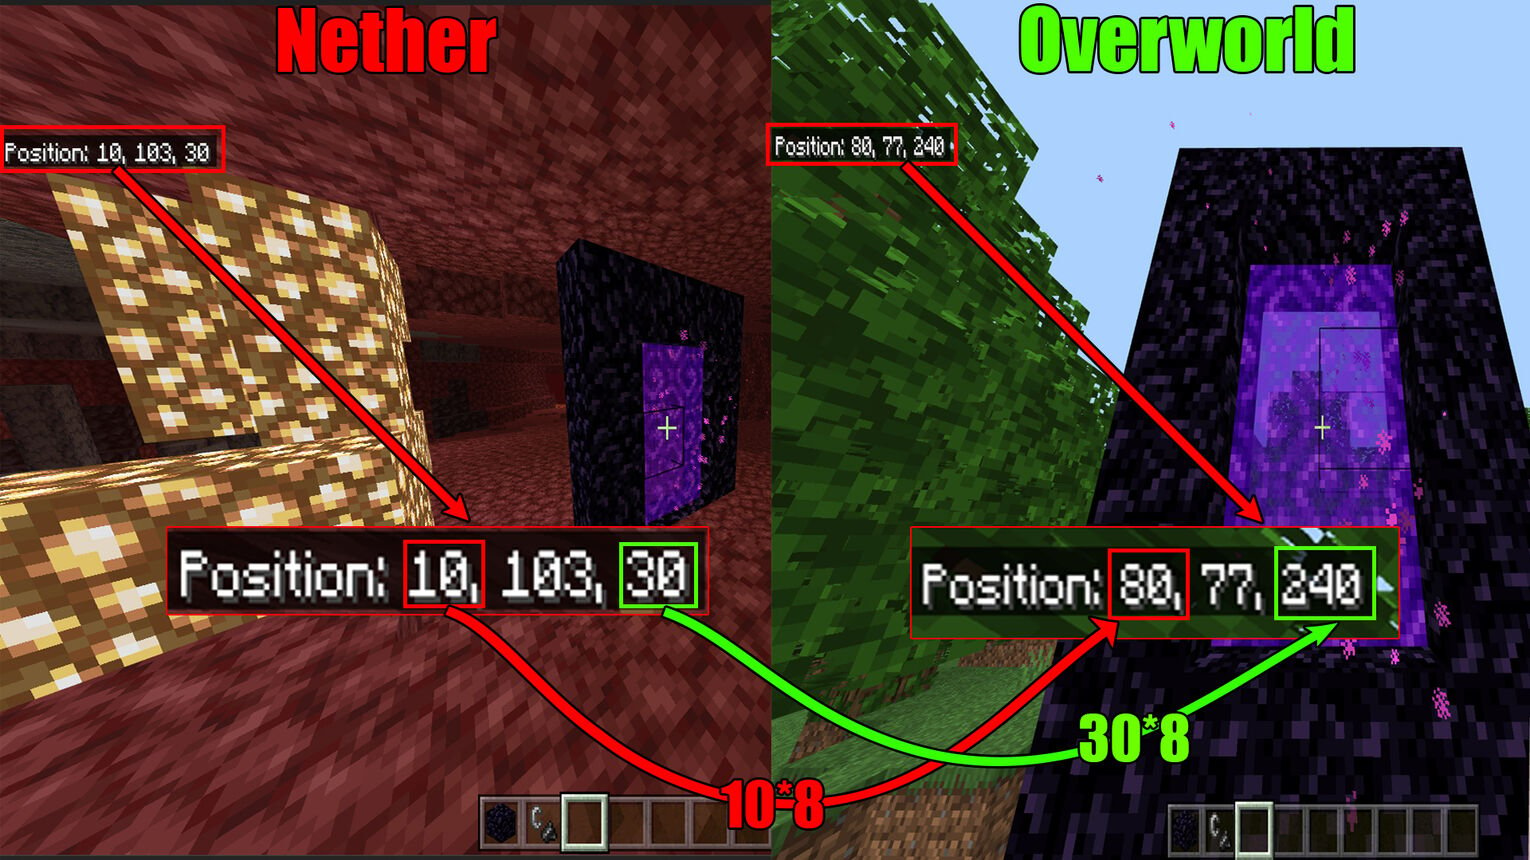 Minecraft How To Calculate Nether Distance Coordinates Bfac2ef581d5bb9296904d0482d7c77f 